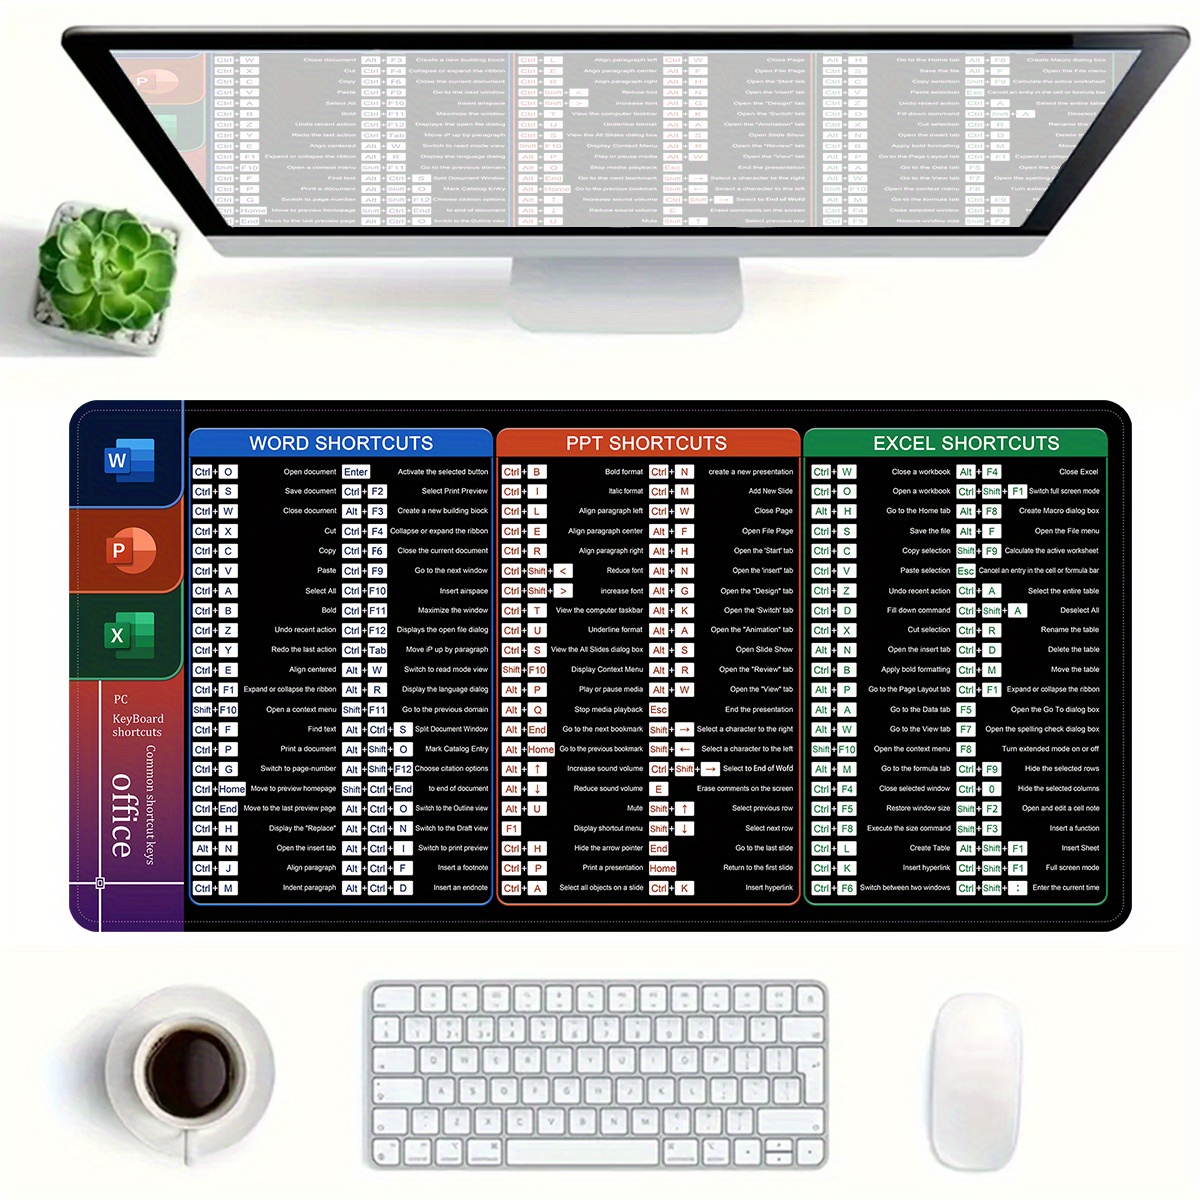 

Extra Large Office Software Keyboard Mouse Pad With Word, Excel, Ppt Shortcuts - Non-slip, Washable Rubber Desk Mat, 31.5x11.8 Inches